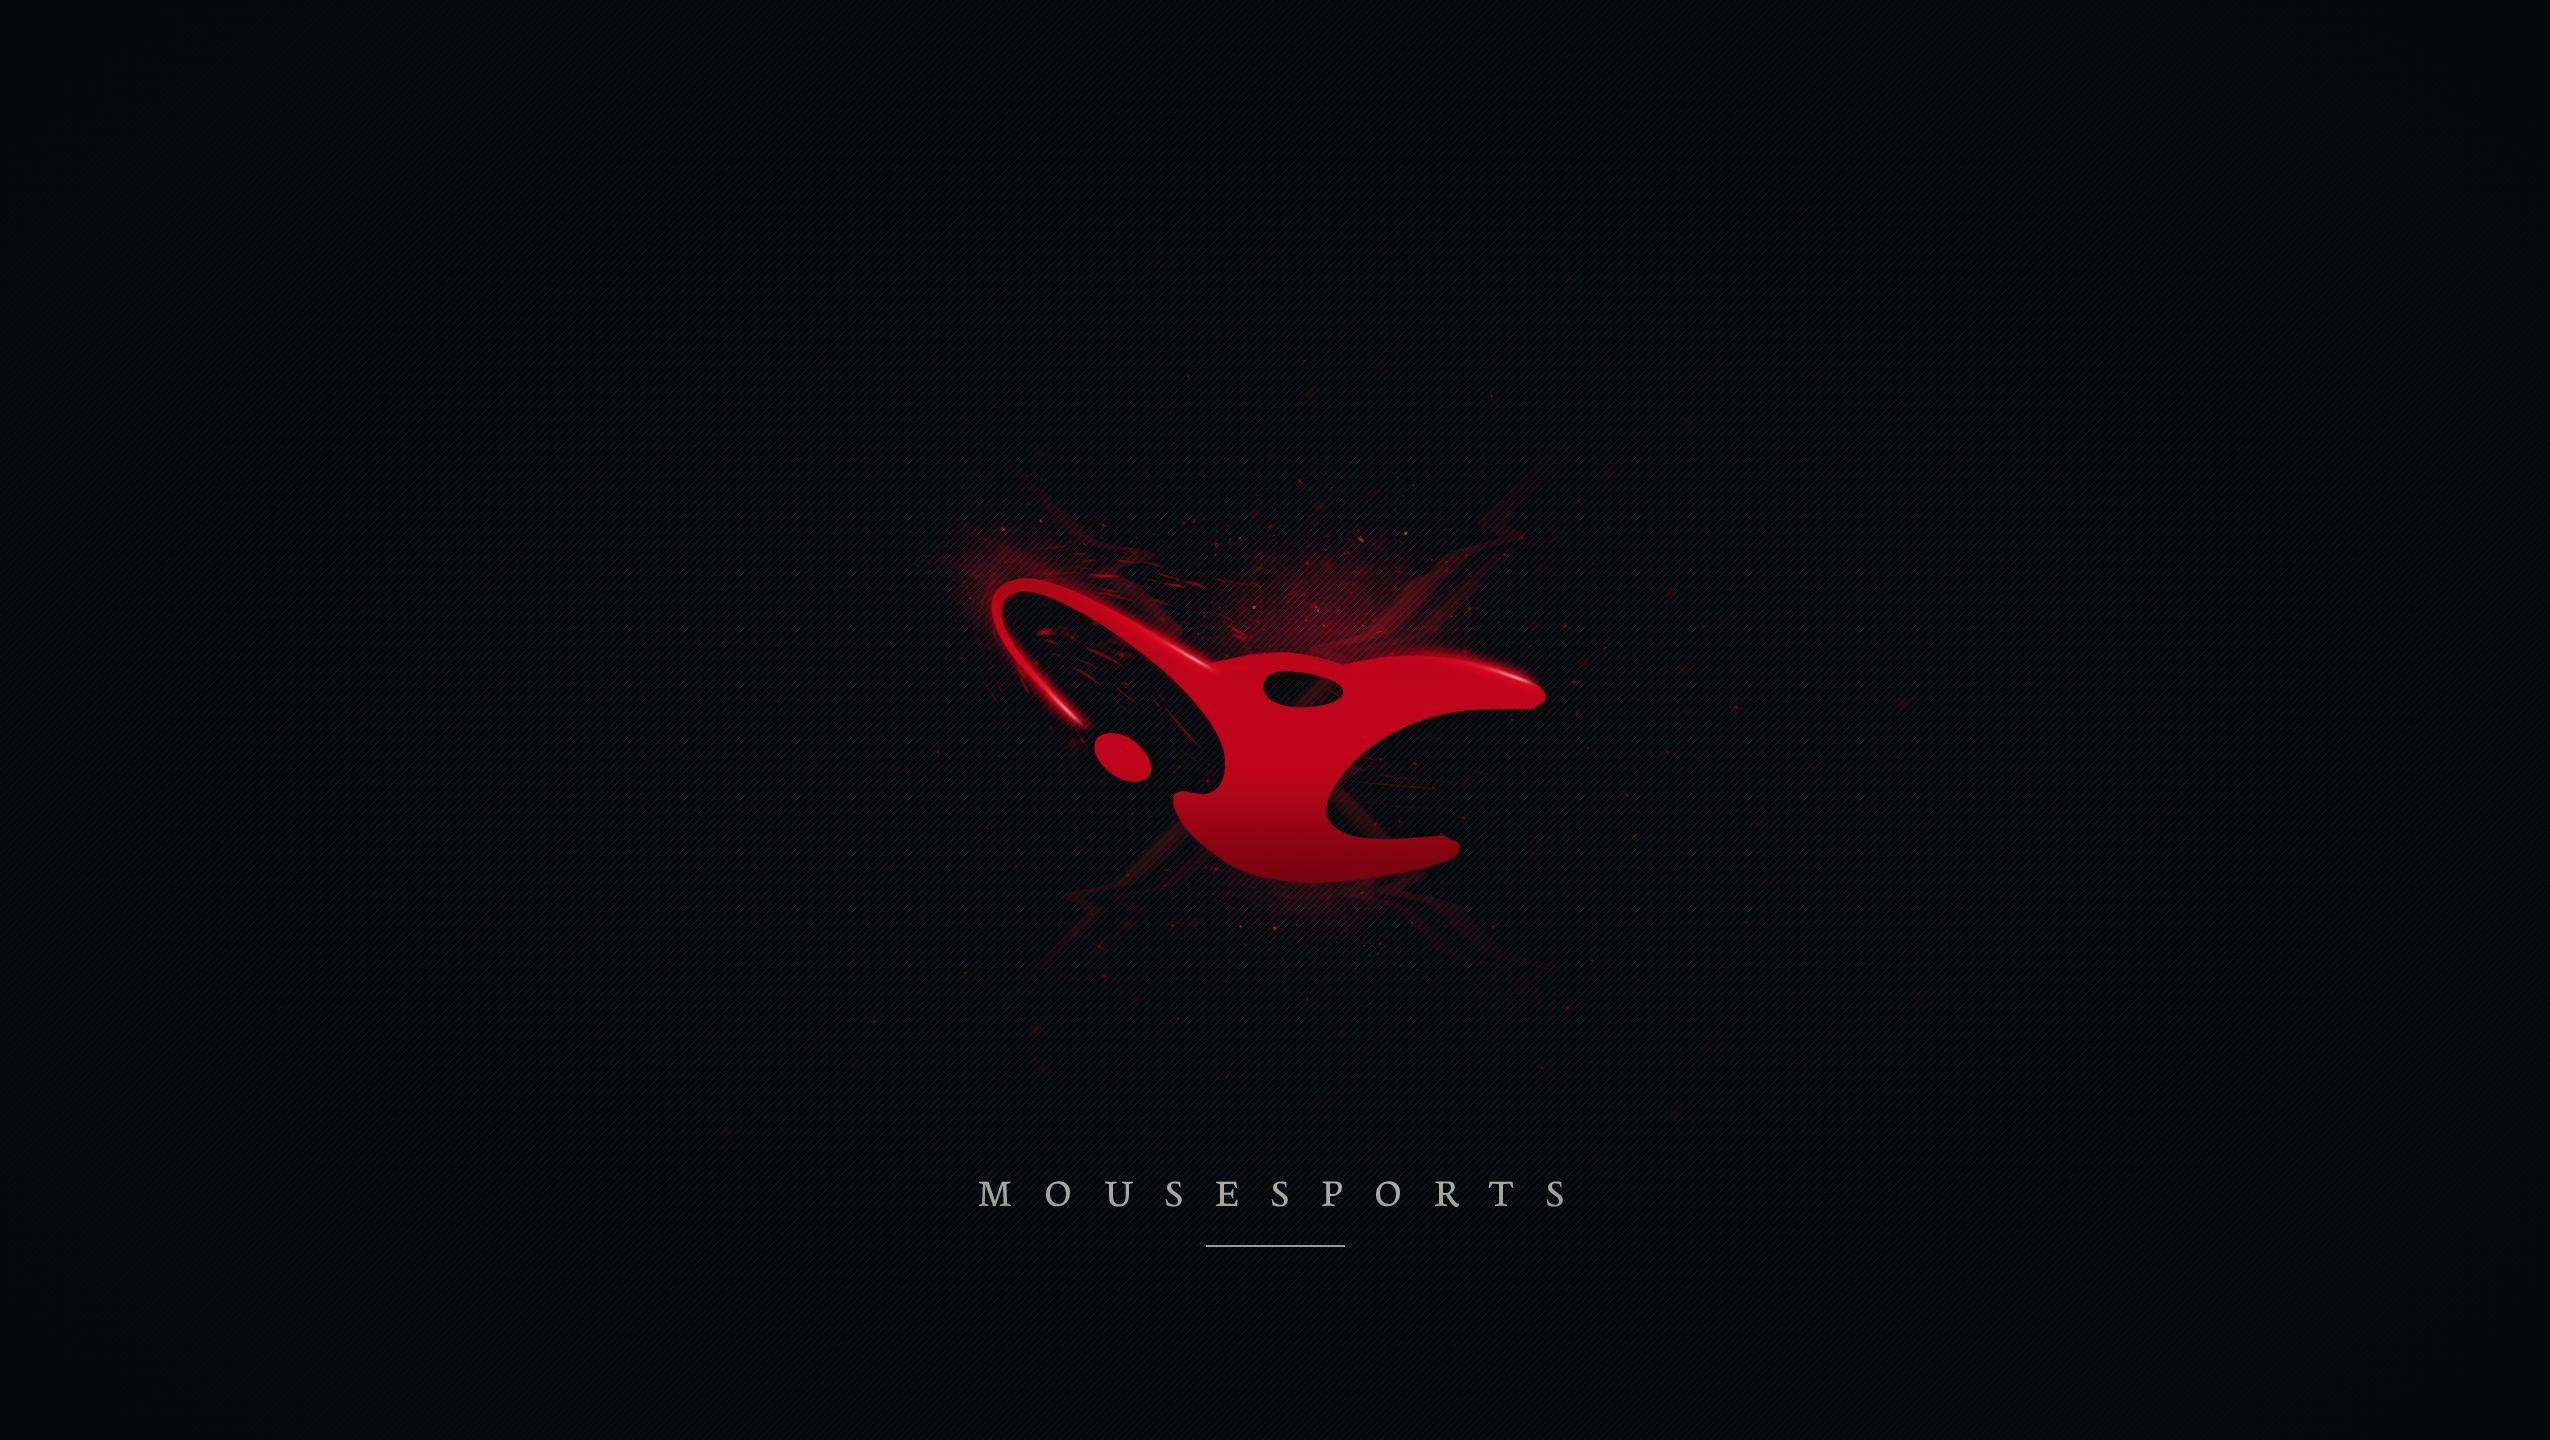 Mousesports Logo - Mousesports Wallpaper Group , Download for free